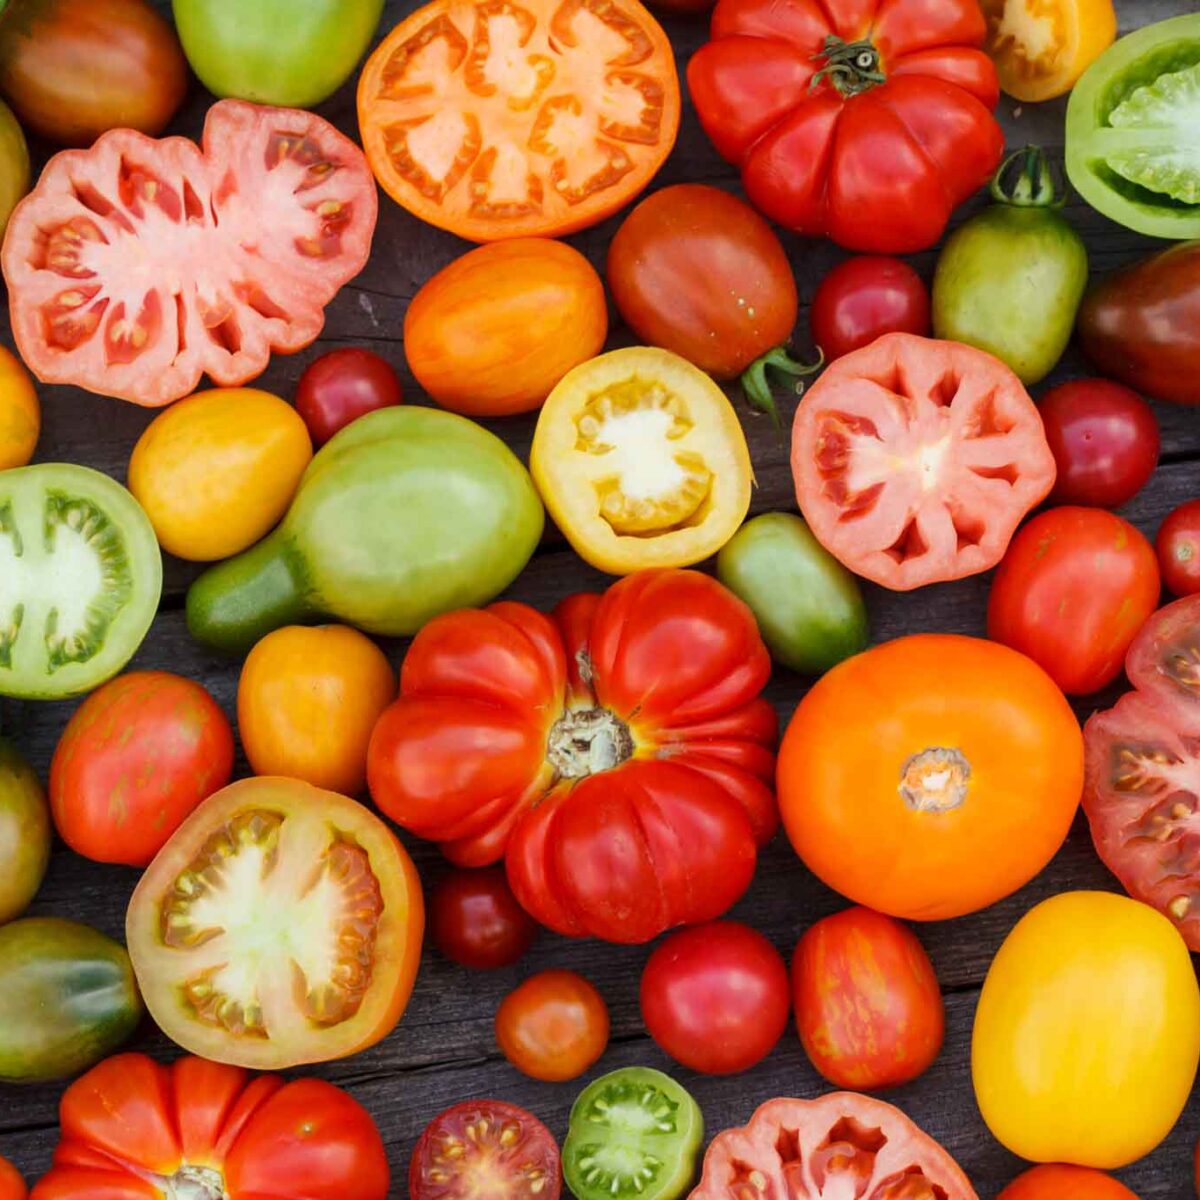 Tomatoes in different colors